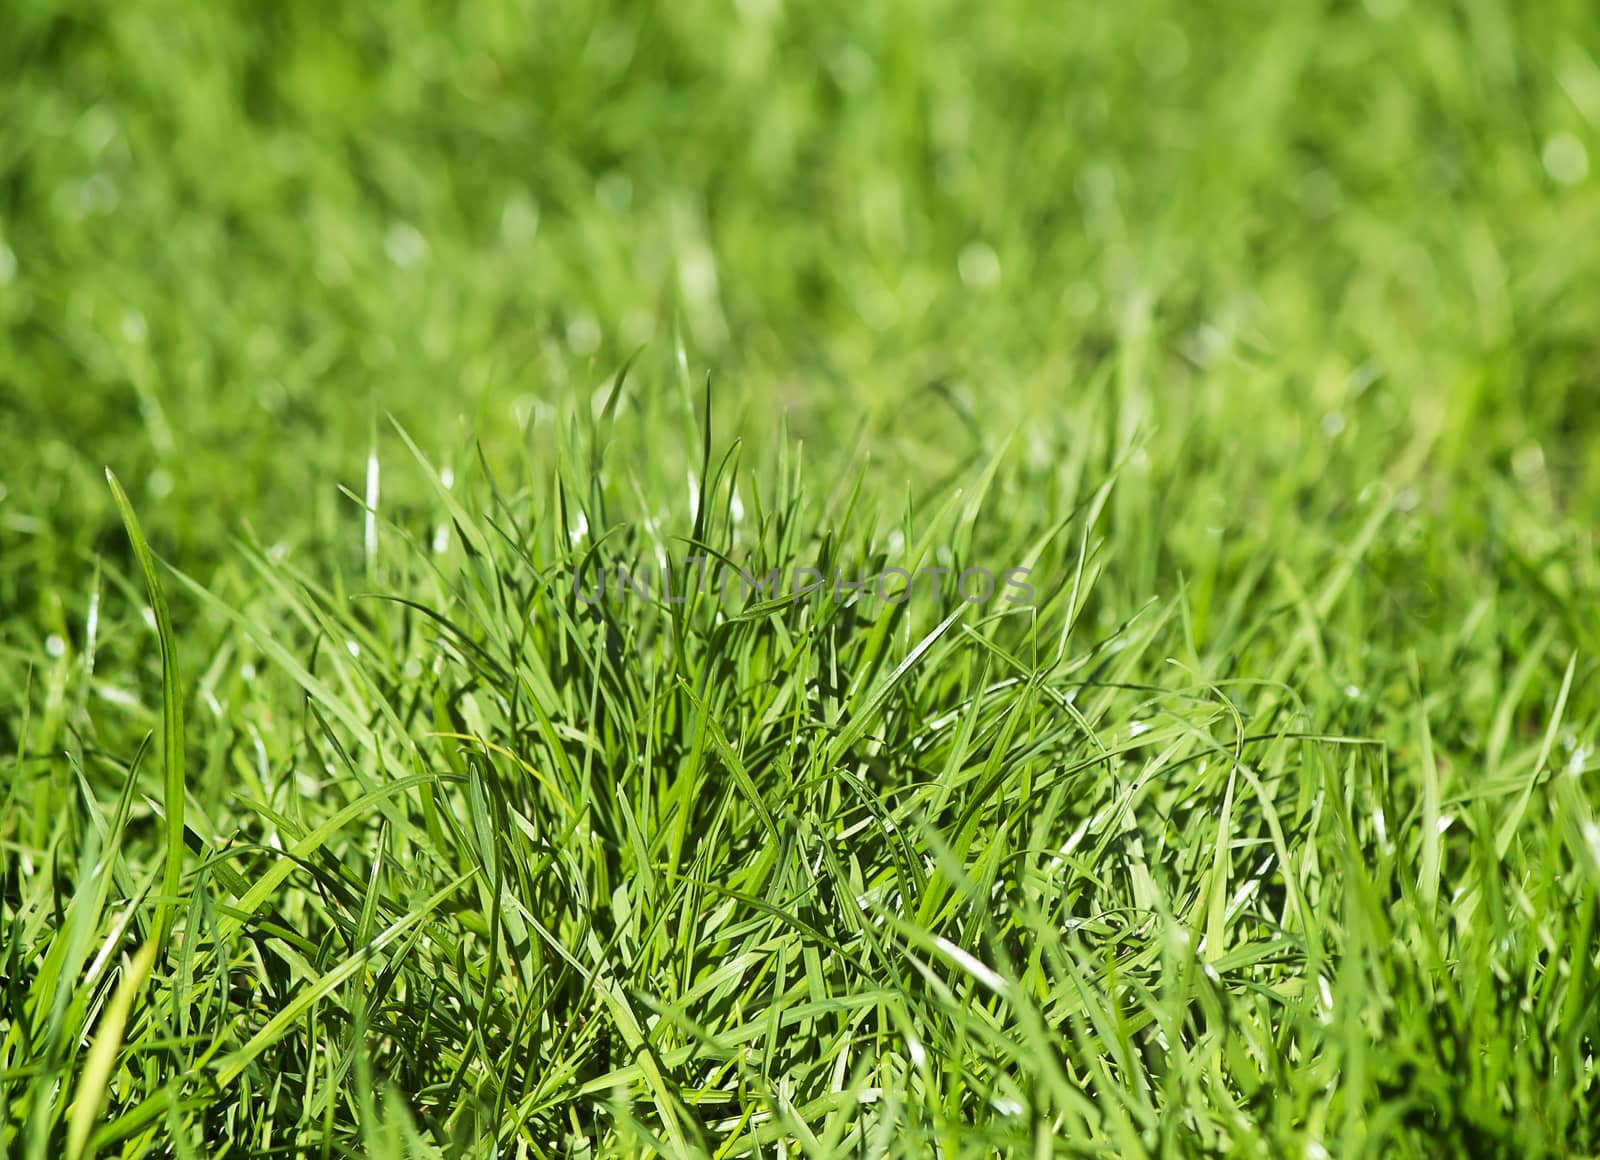 Growing bright green young grass on a solar lawn.